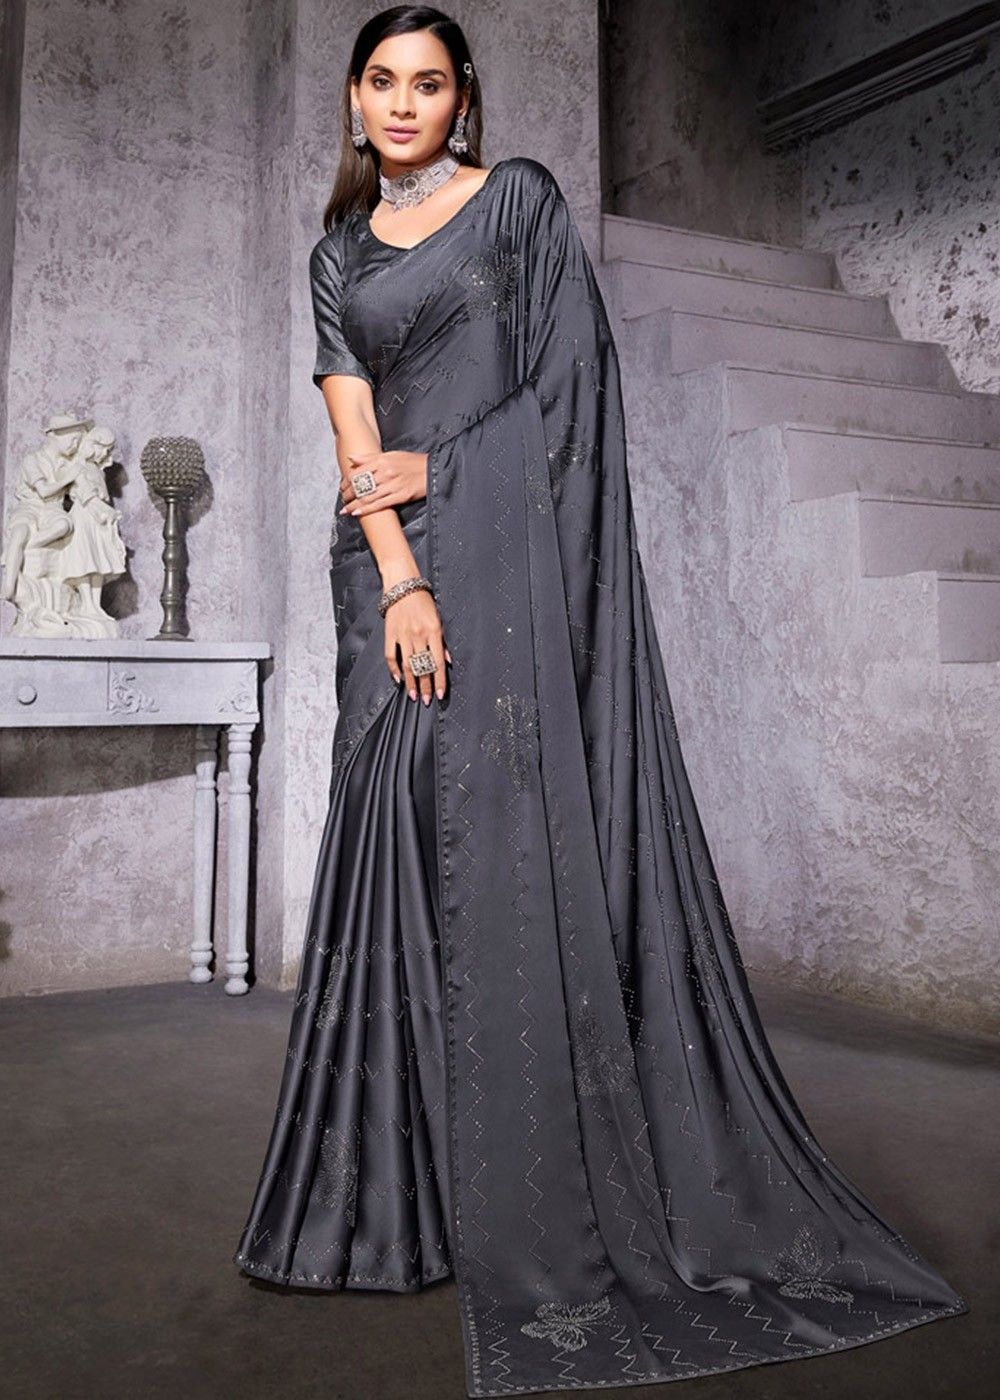 Update more than 76 matching blouse for grey saree best